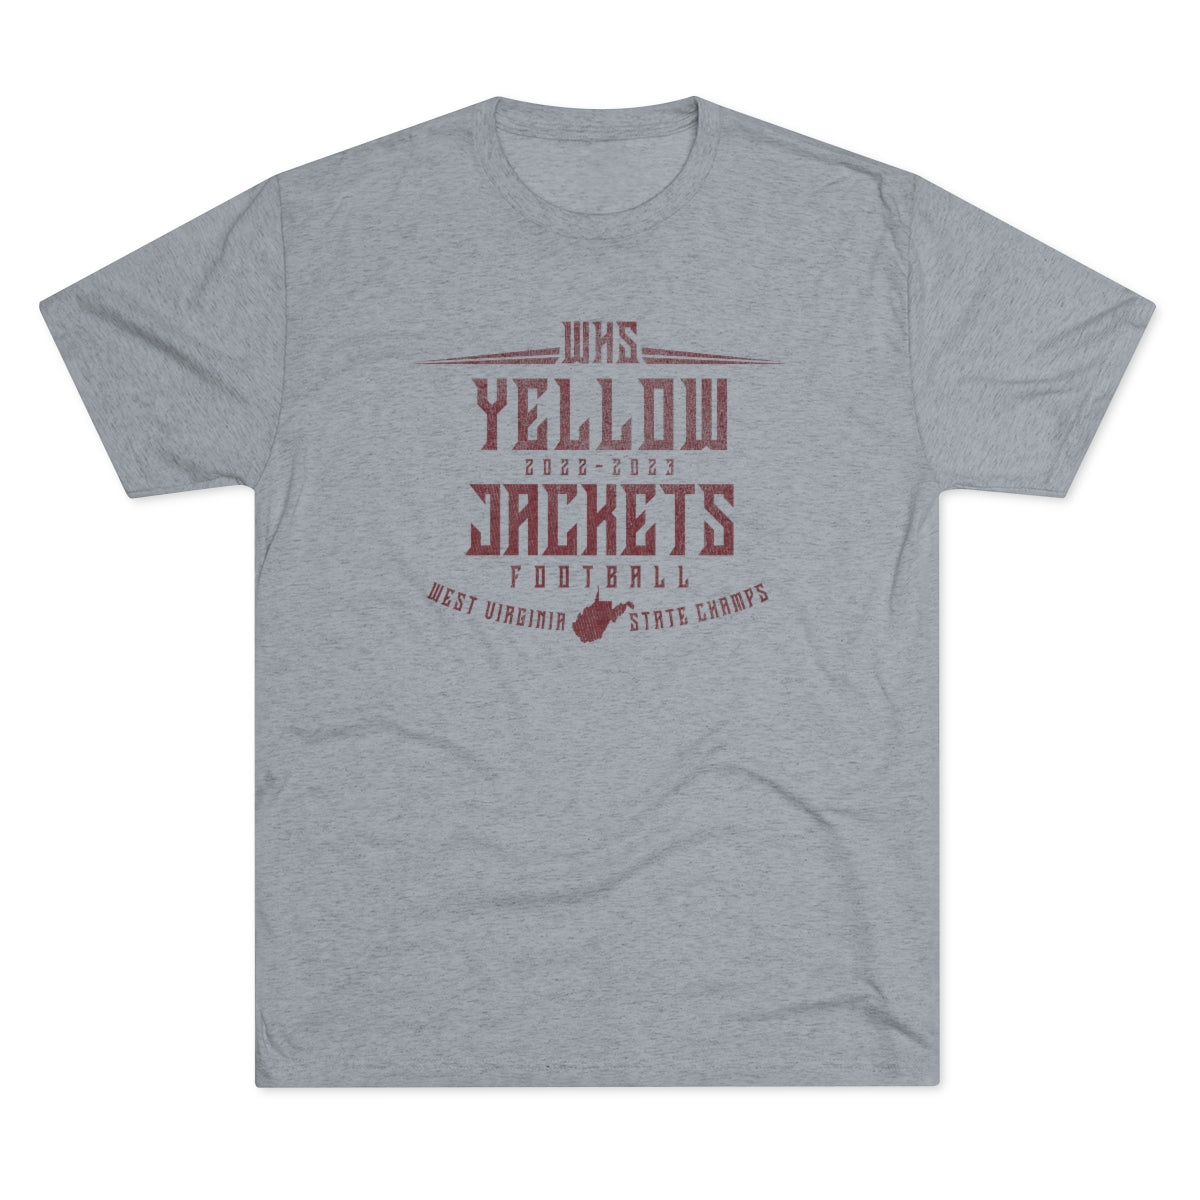 WHS YELLOW JACKETS-2022-2023 WV STATE CHAMPS_Unisex Tri-Blend Crew Tee